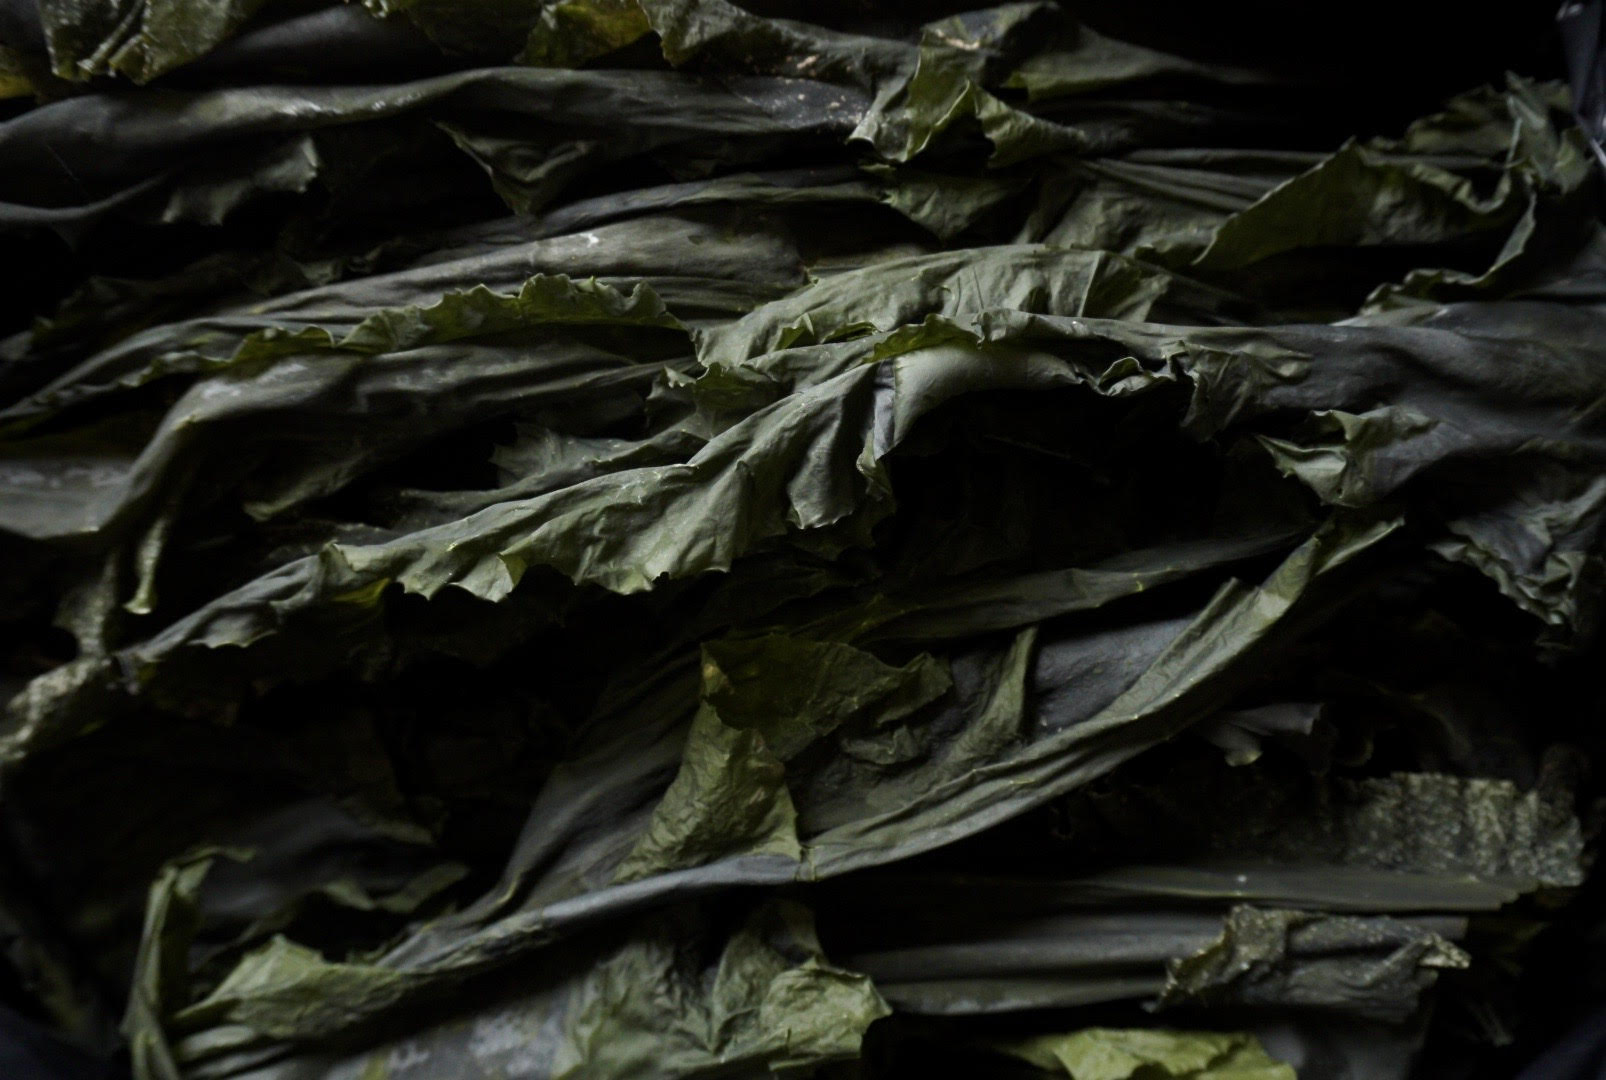 Healthy & natural organic kelp in whole leaf bags. Comes in small bags or easy snacking or bulk seaweed bags.